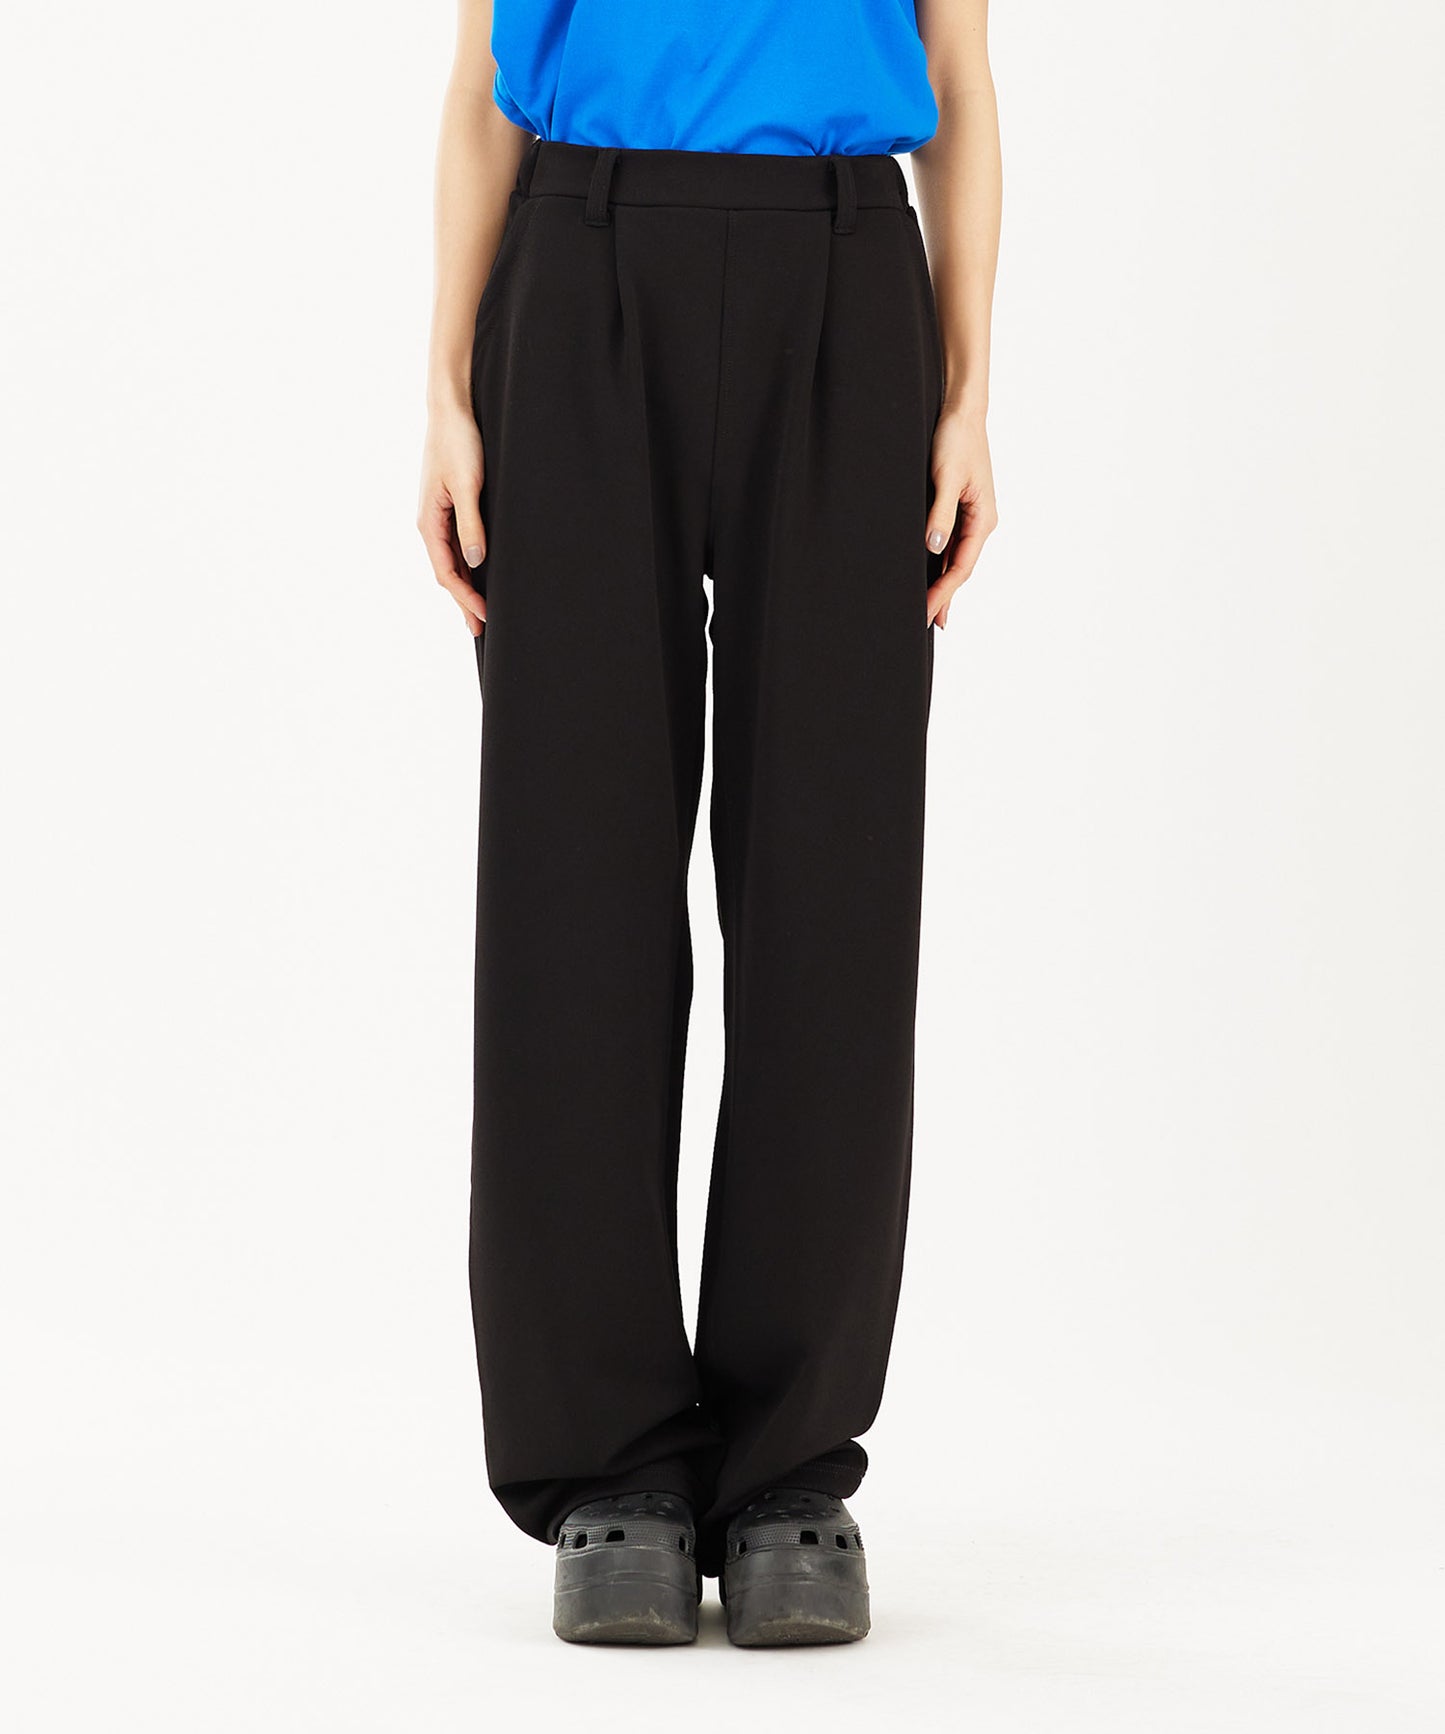 WIDE TAPERED EASY PANTS